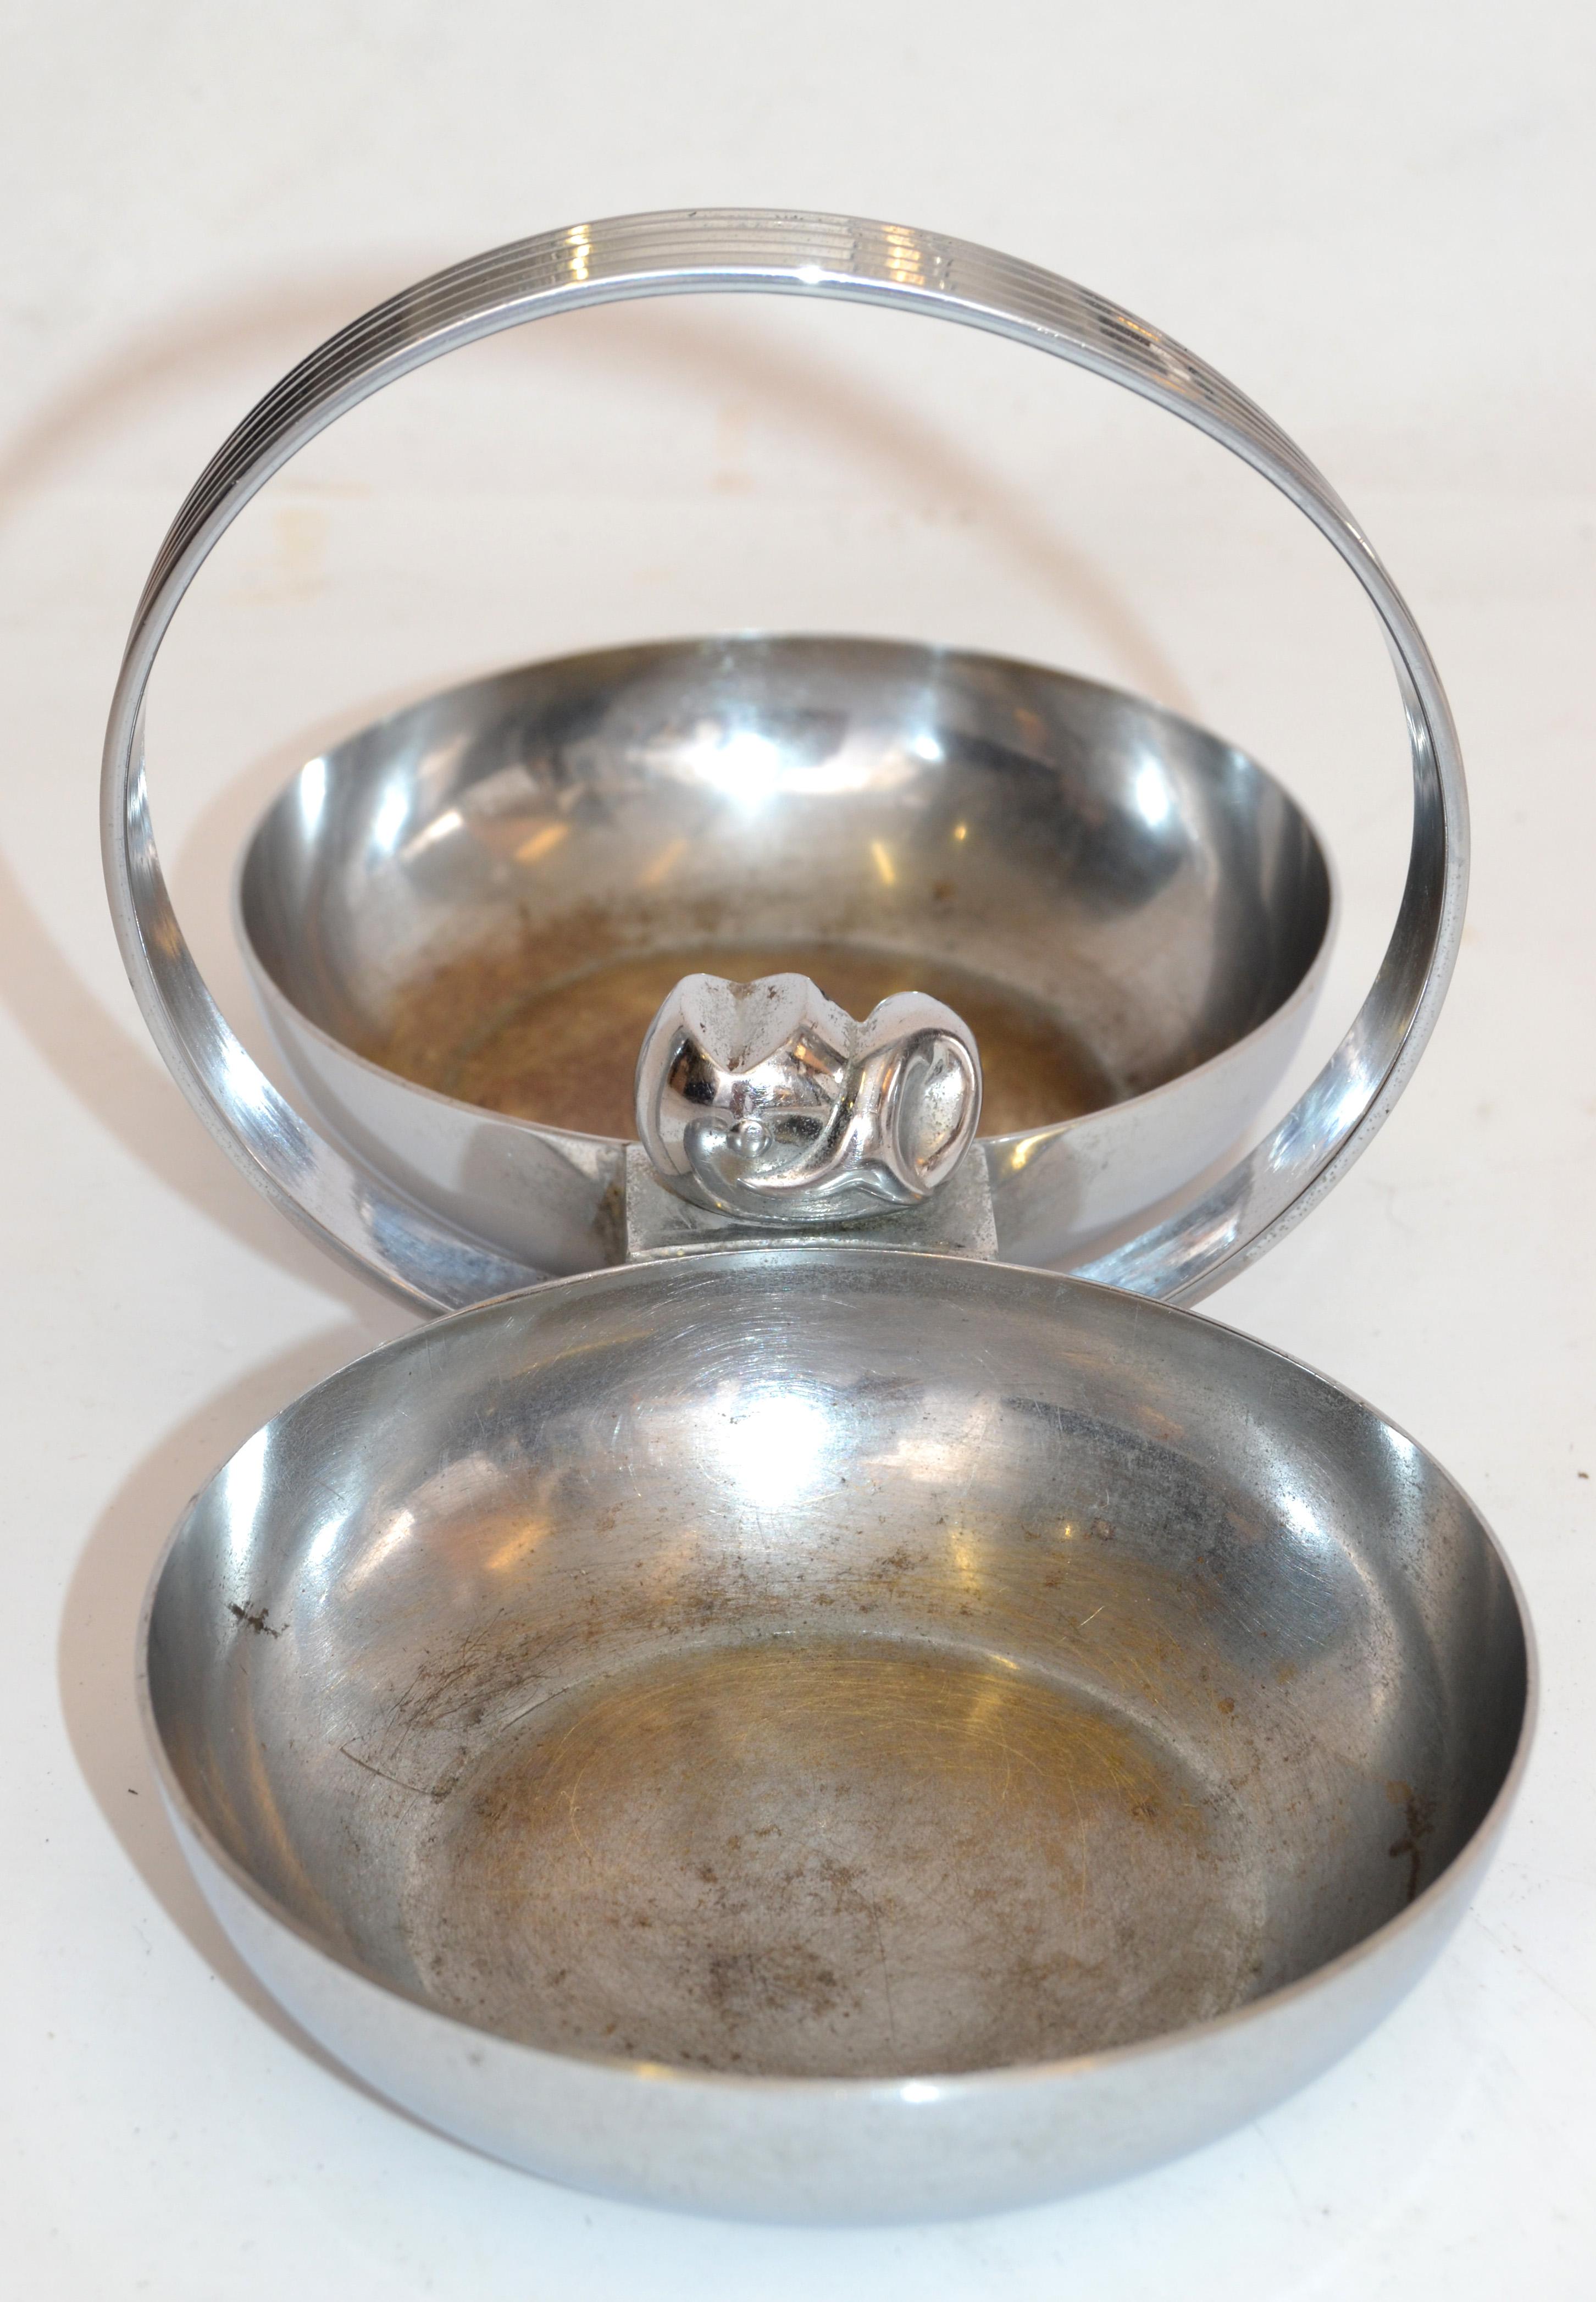 Mid-20th Century Art Deco Chase USA Chrome on Brass Twin Candy & Nut Dish designed Gerth & Gerth For Sale